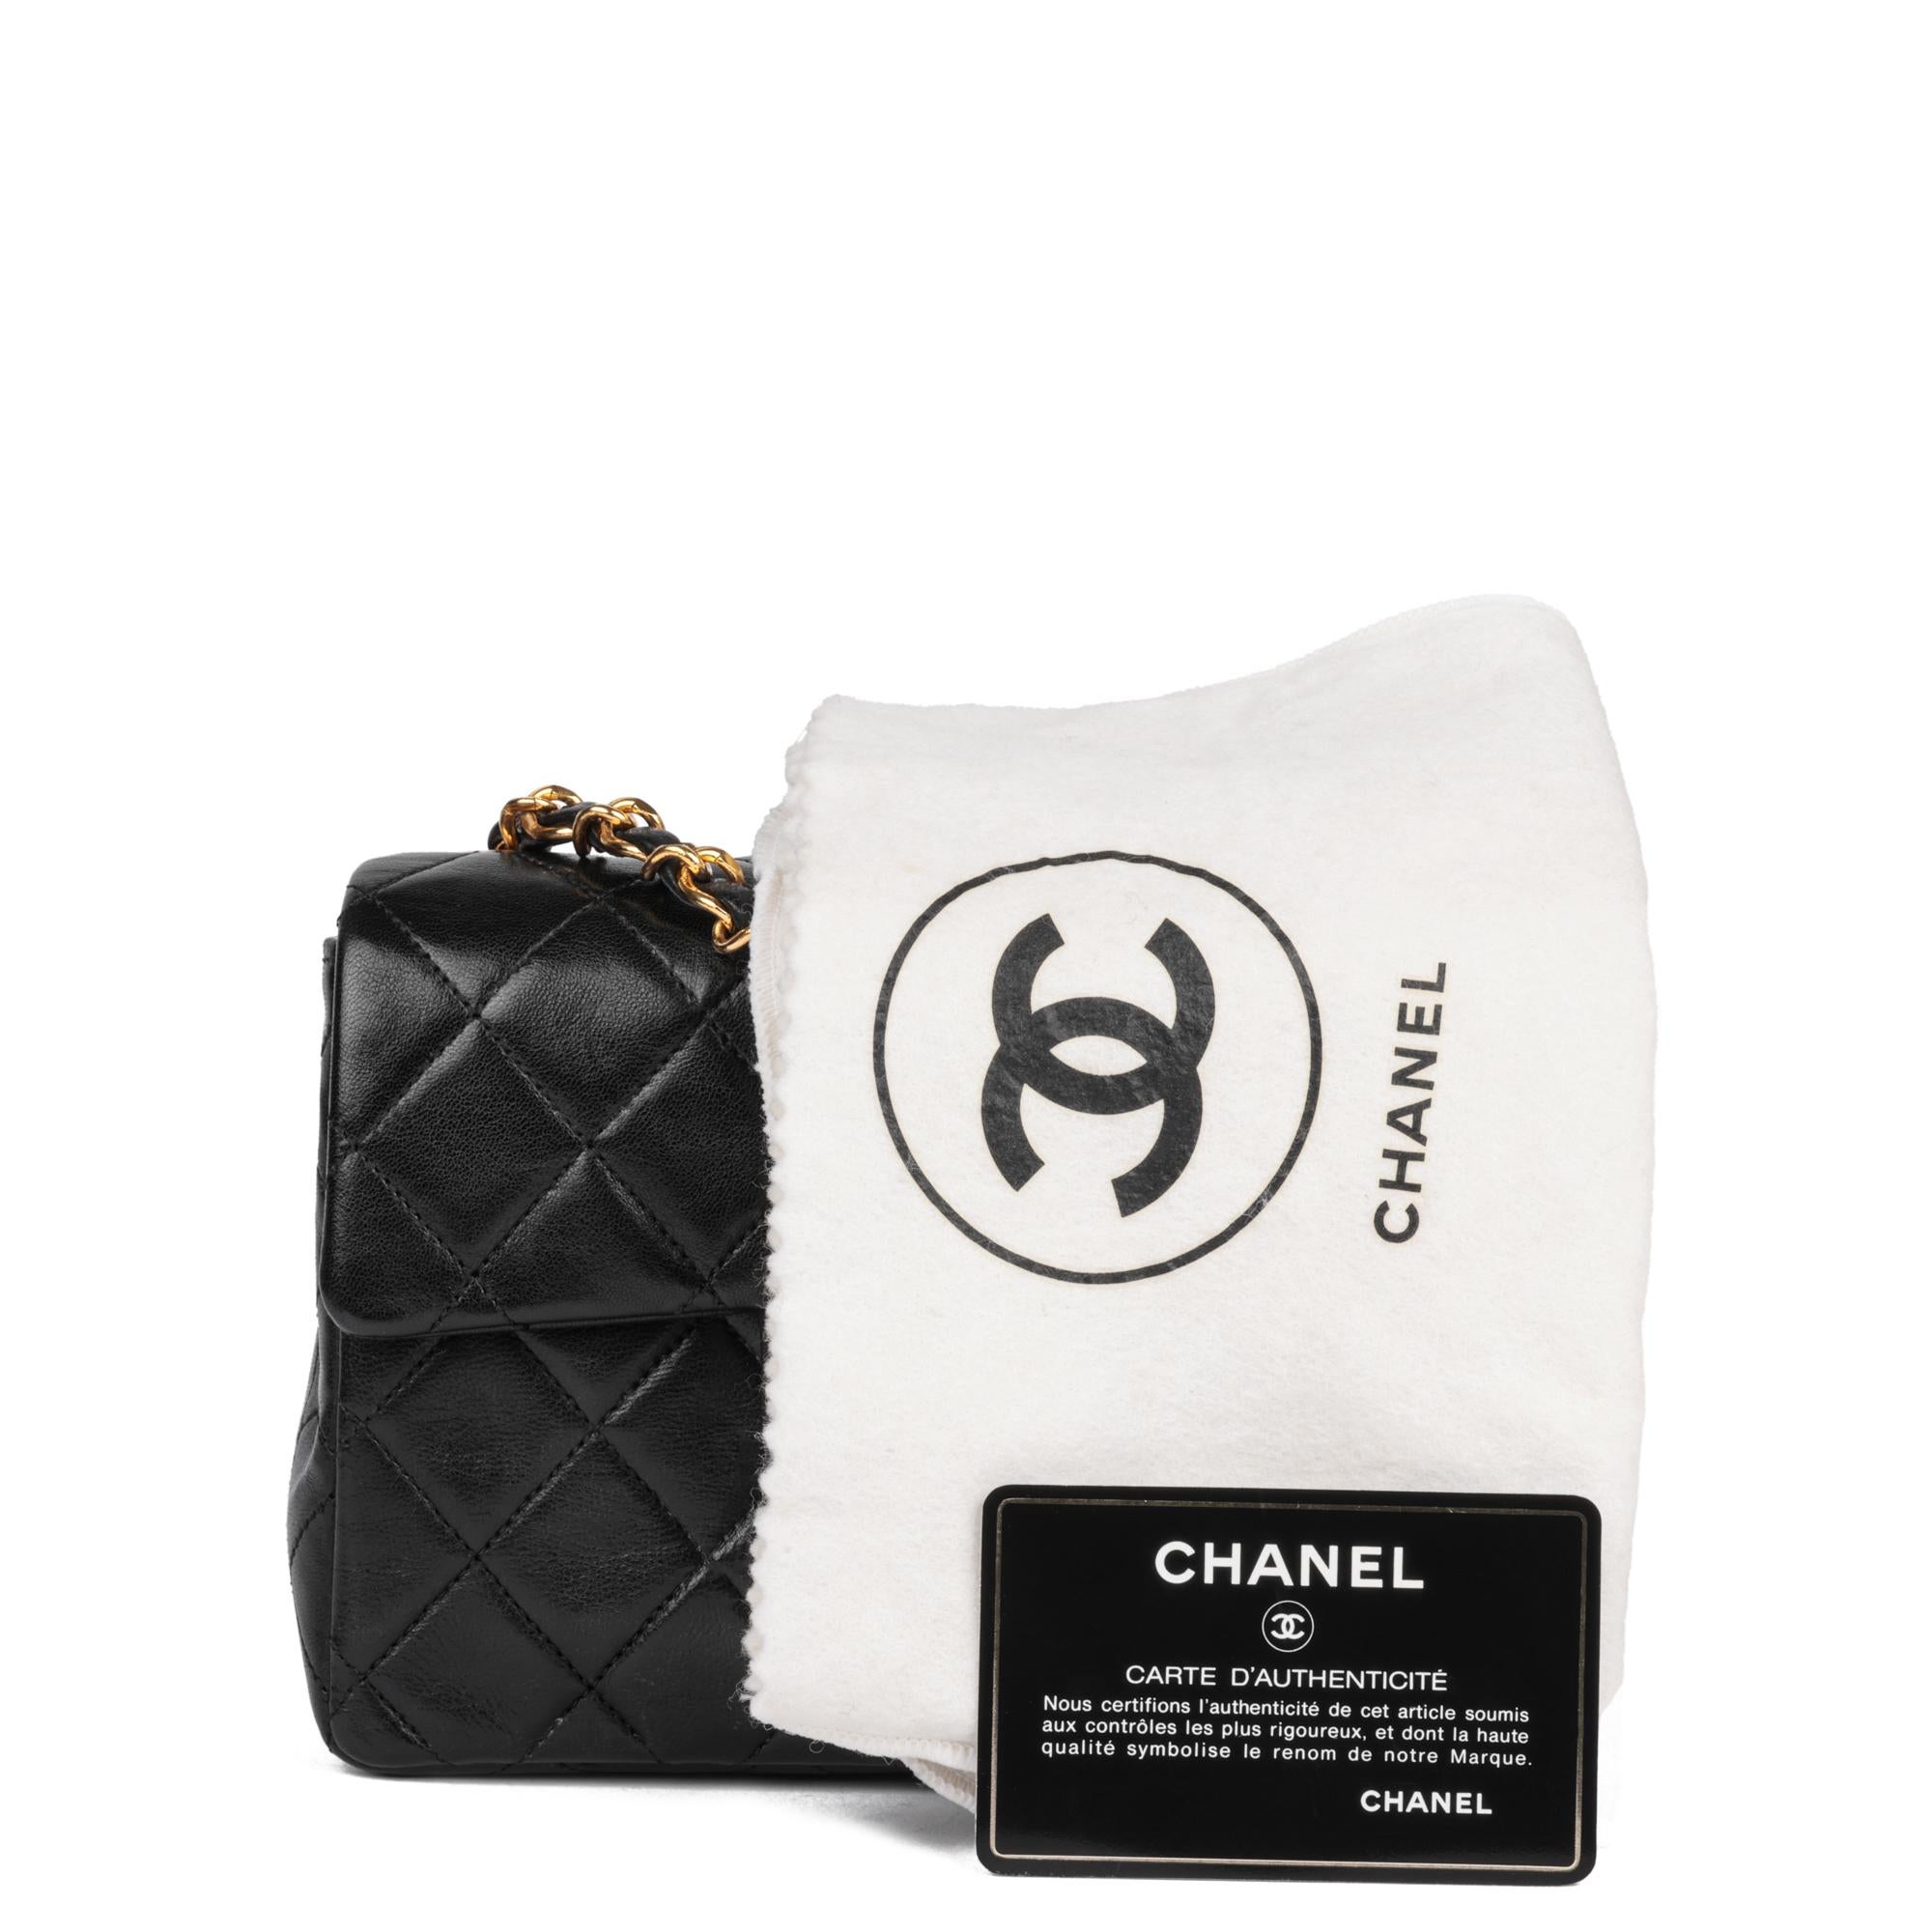 CHANEL Black Quilted Lambskin Vintage Square Mini Flap Bag 8